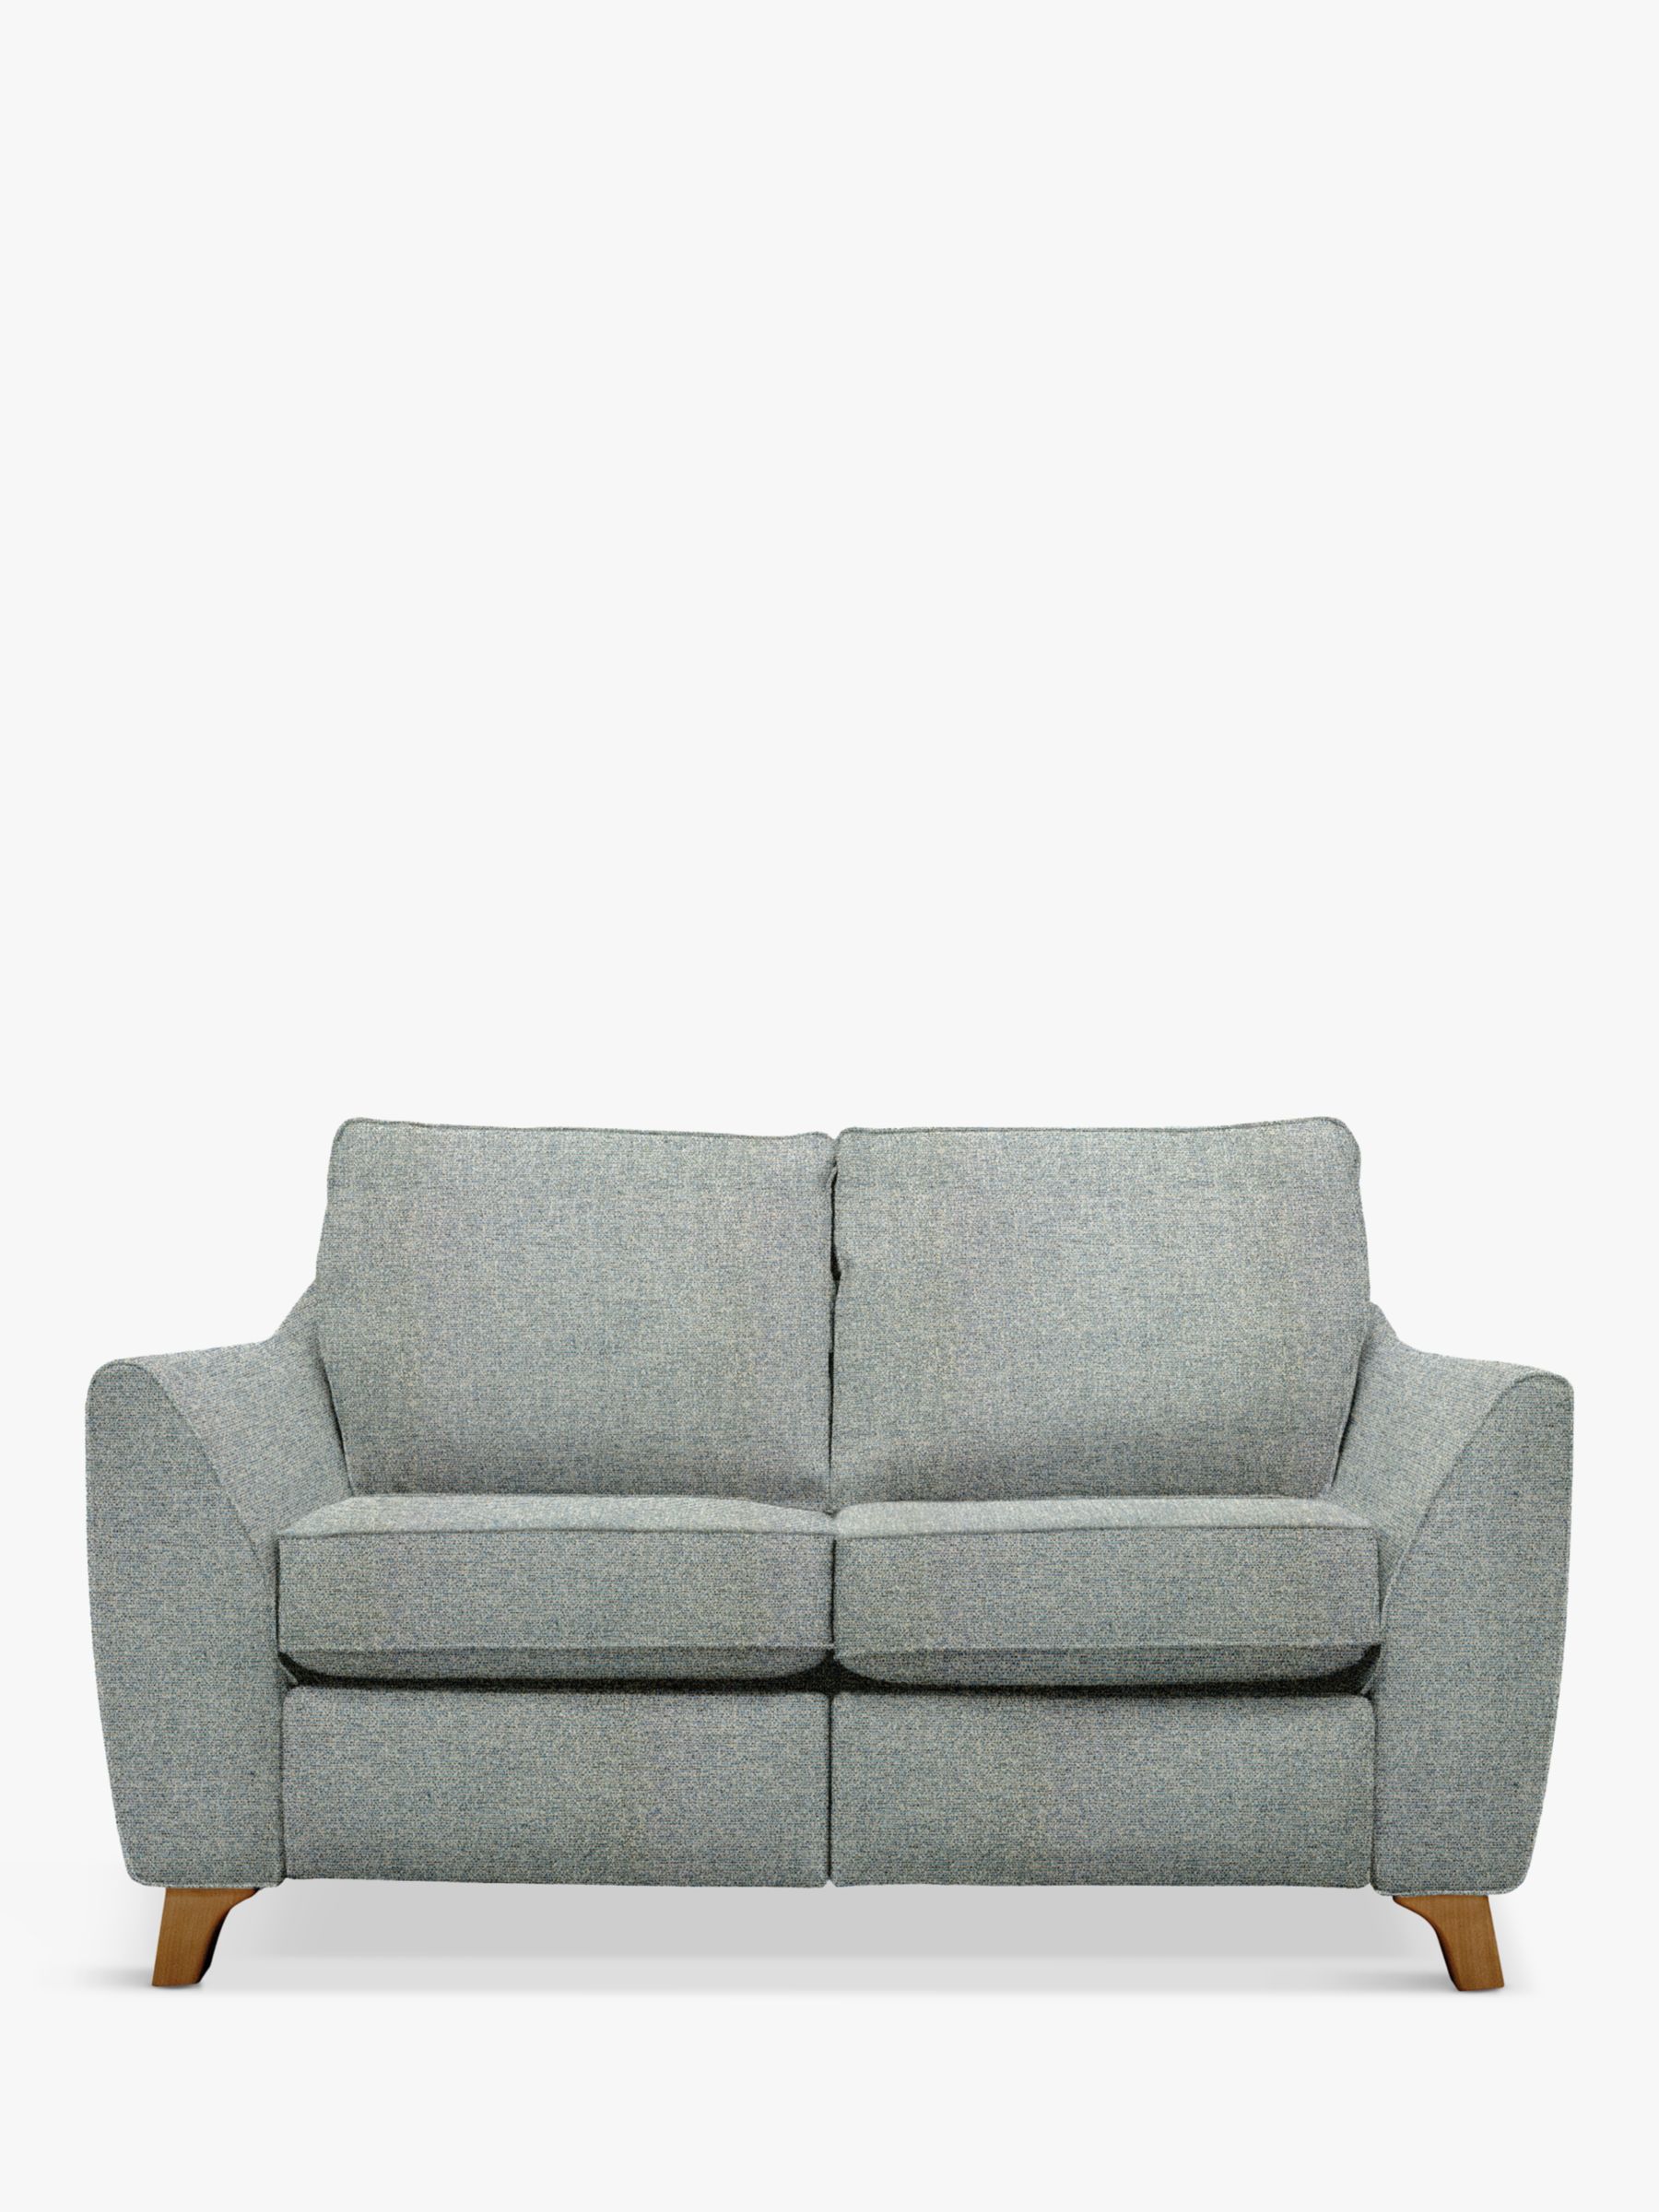 The Sixty Eight Range, G Plan Vintage The Sixty Eight Small 2 Seater Sofa, Etch Ink